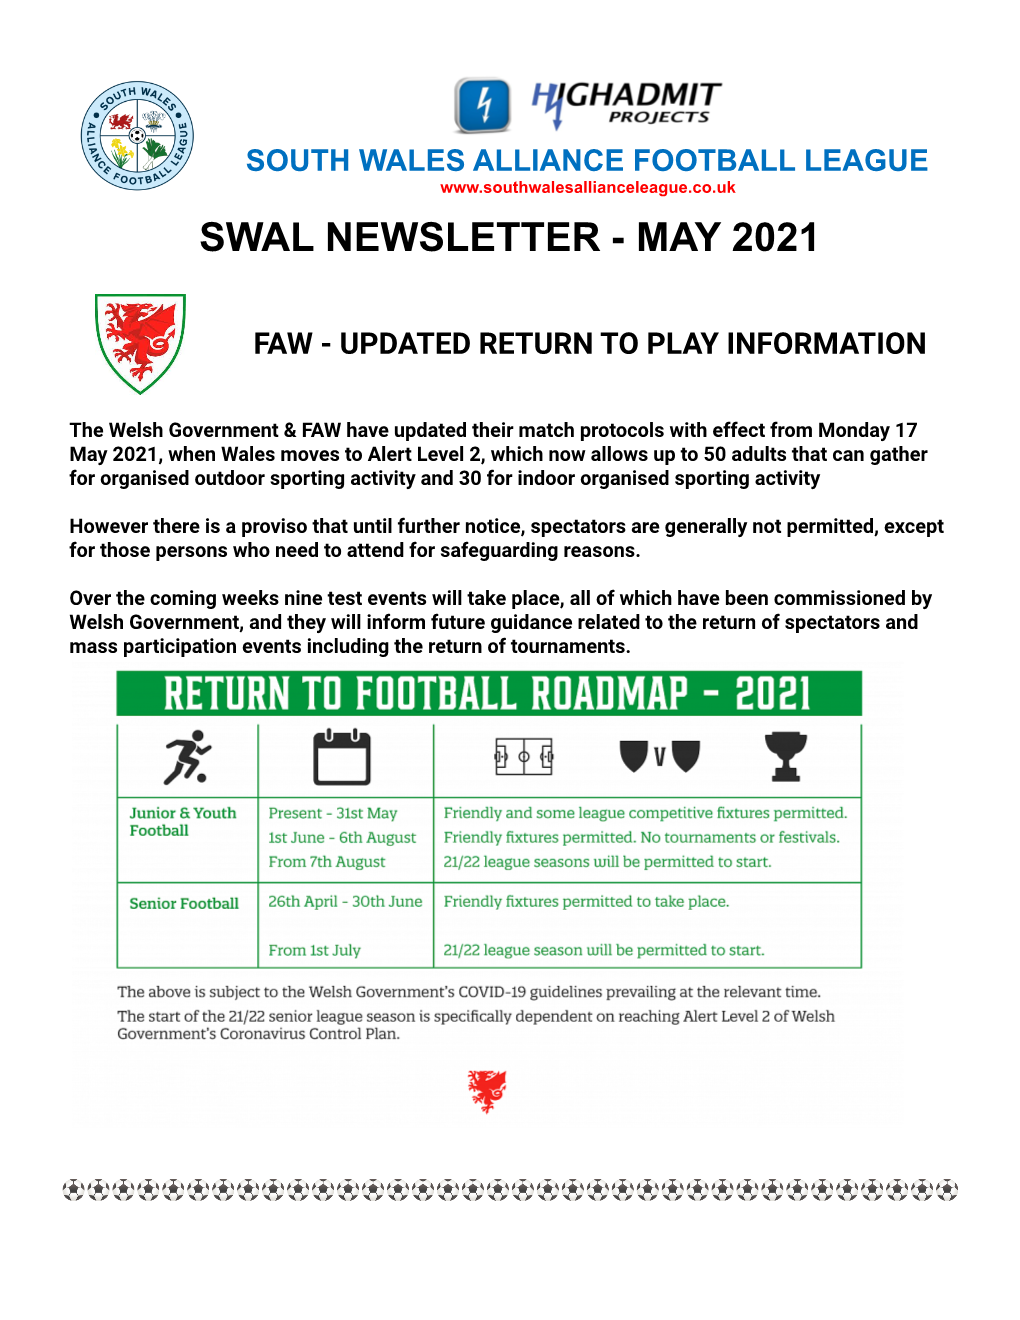 SWAL Newsletter May 2021